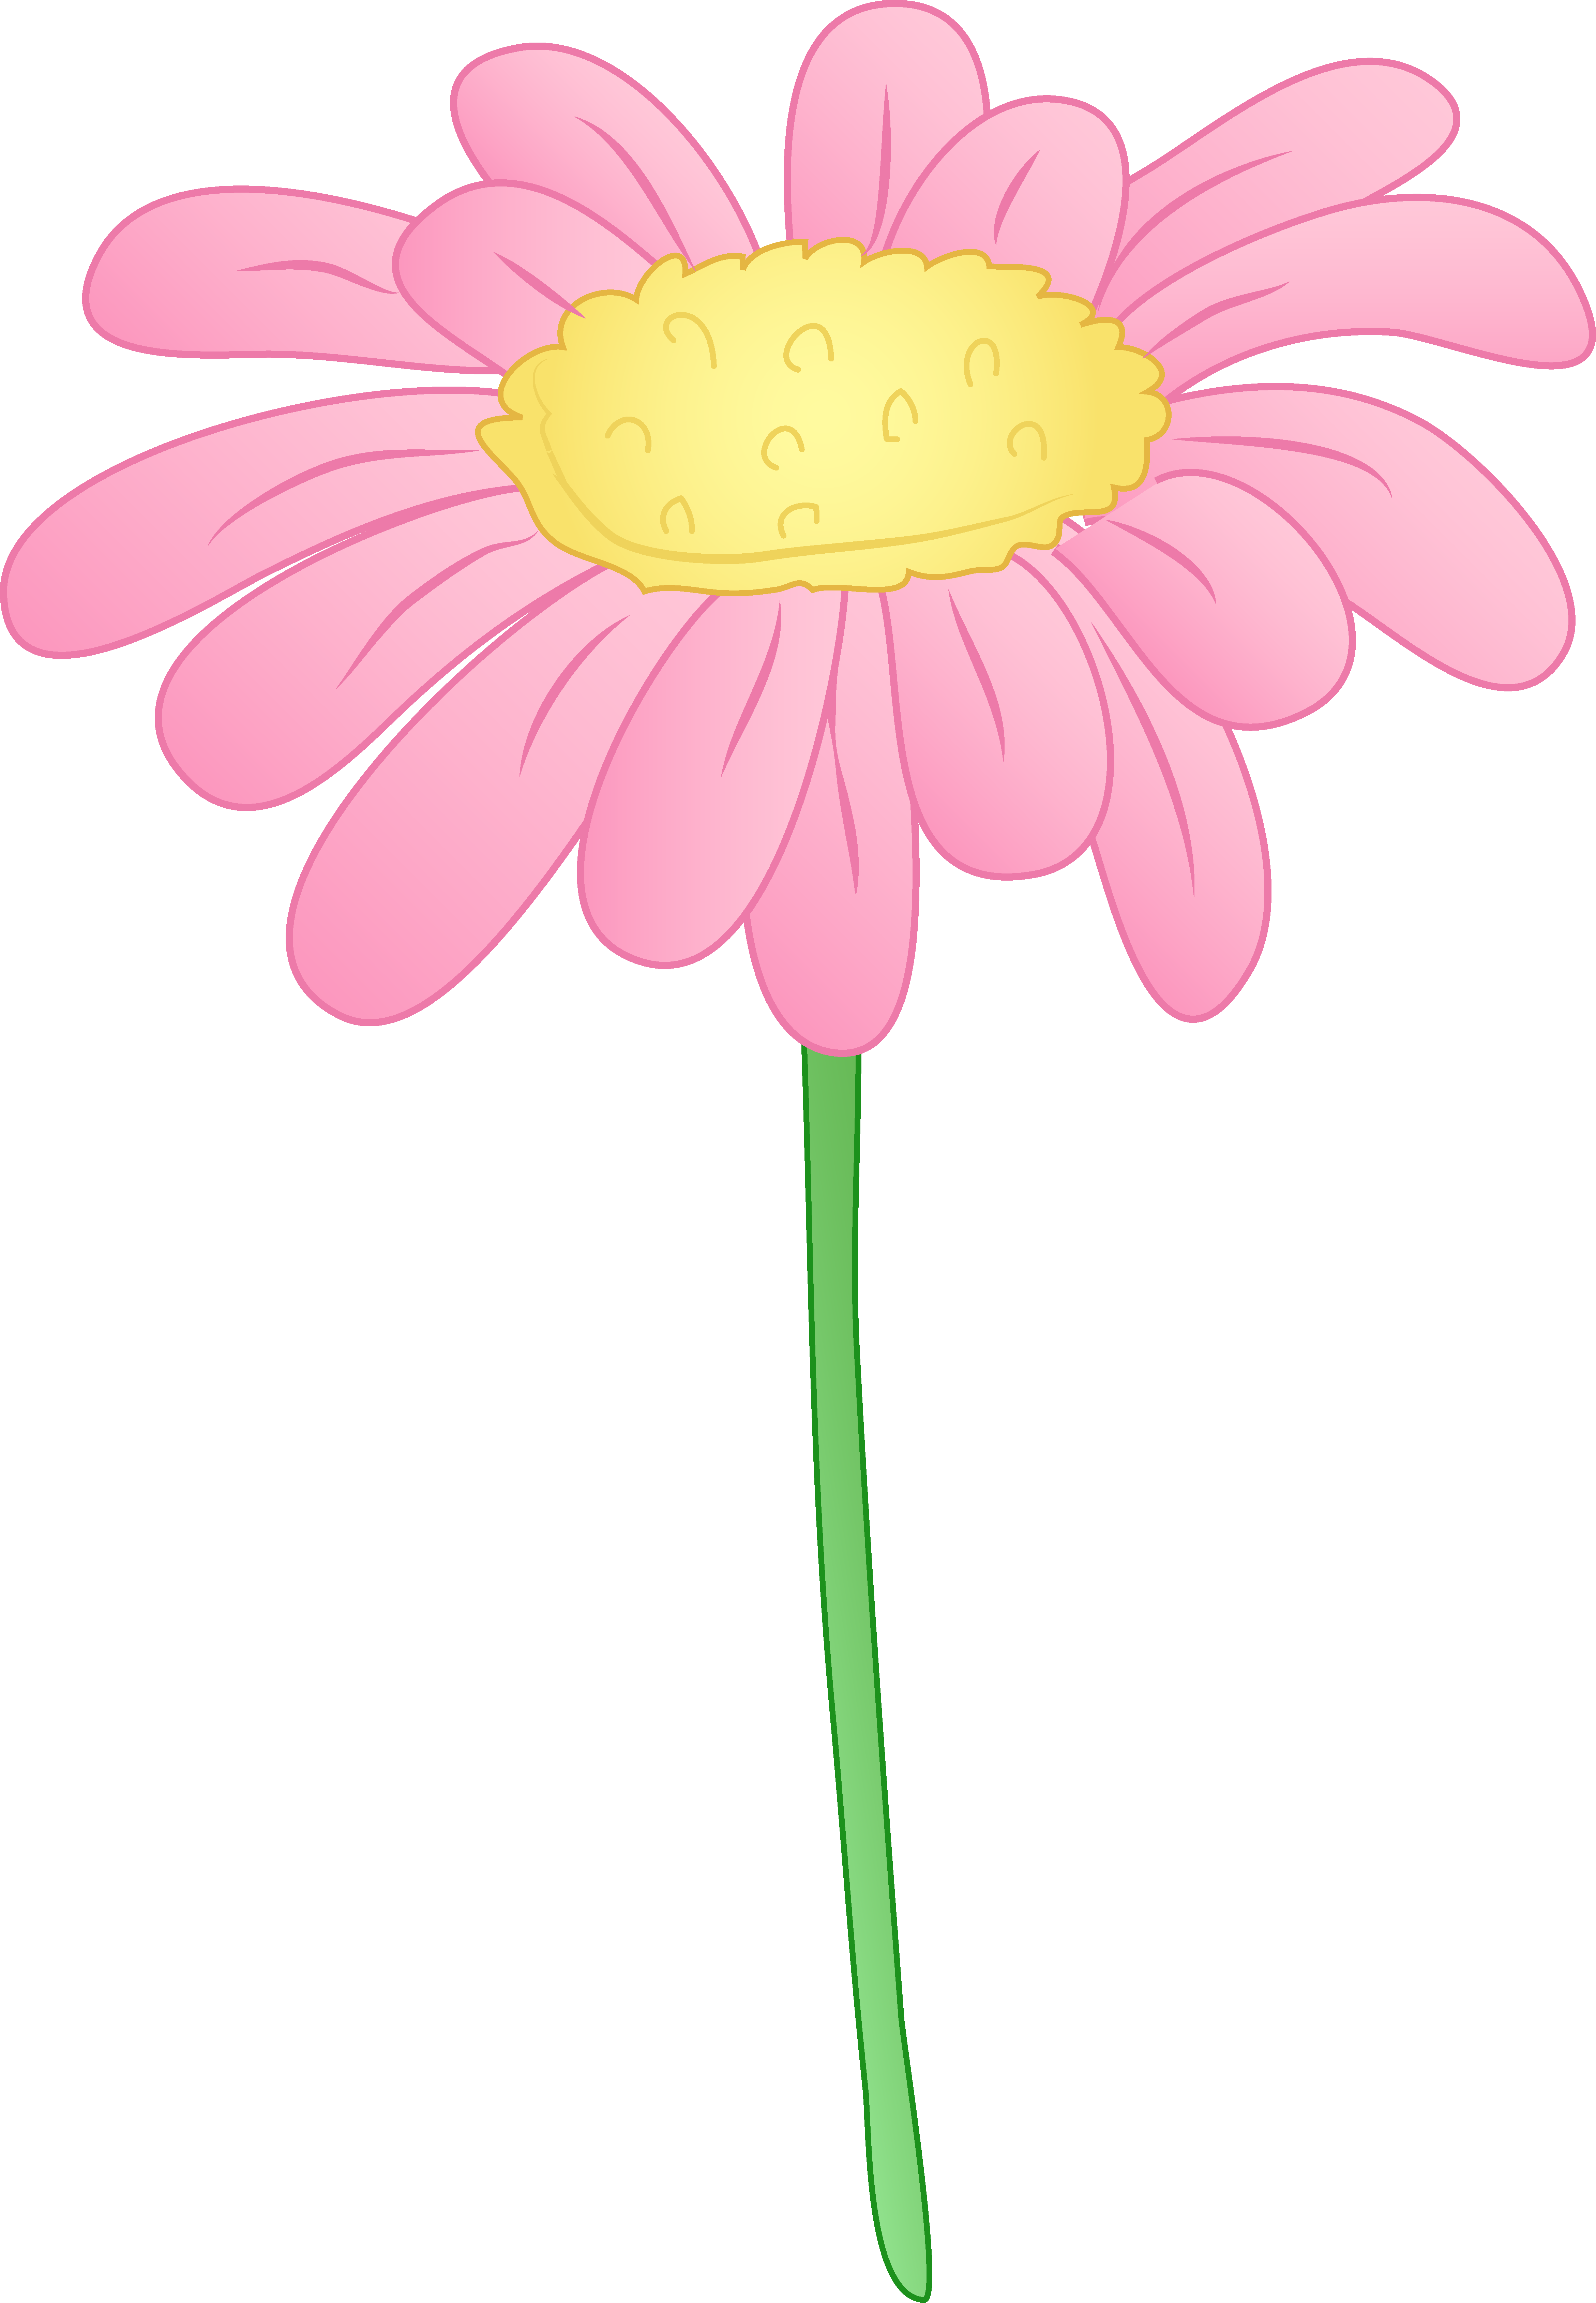 Free Free Daisy Images, Download Free Clip Art, Free Clip Art on